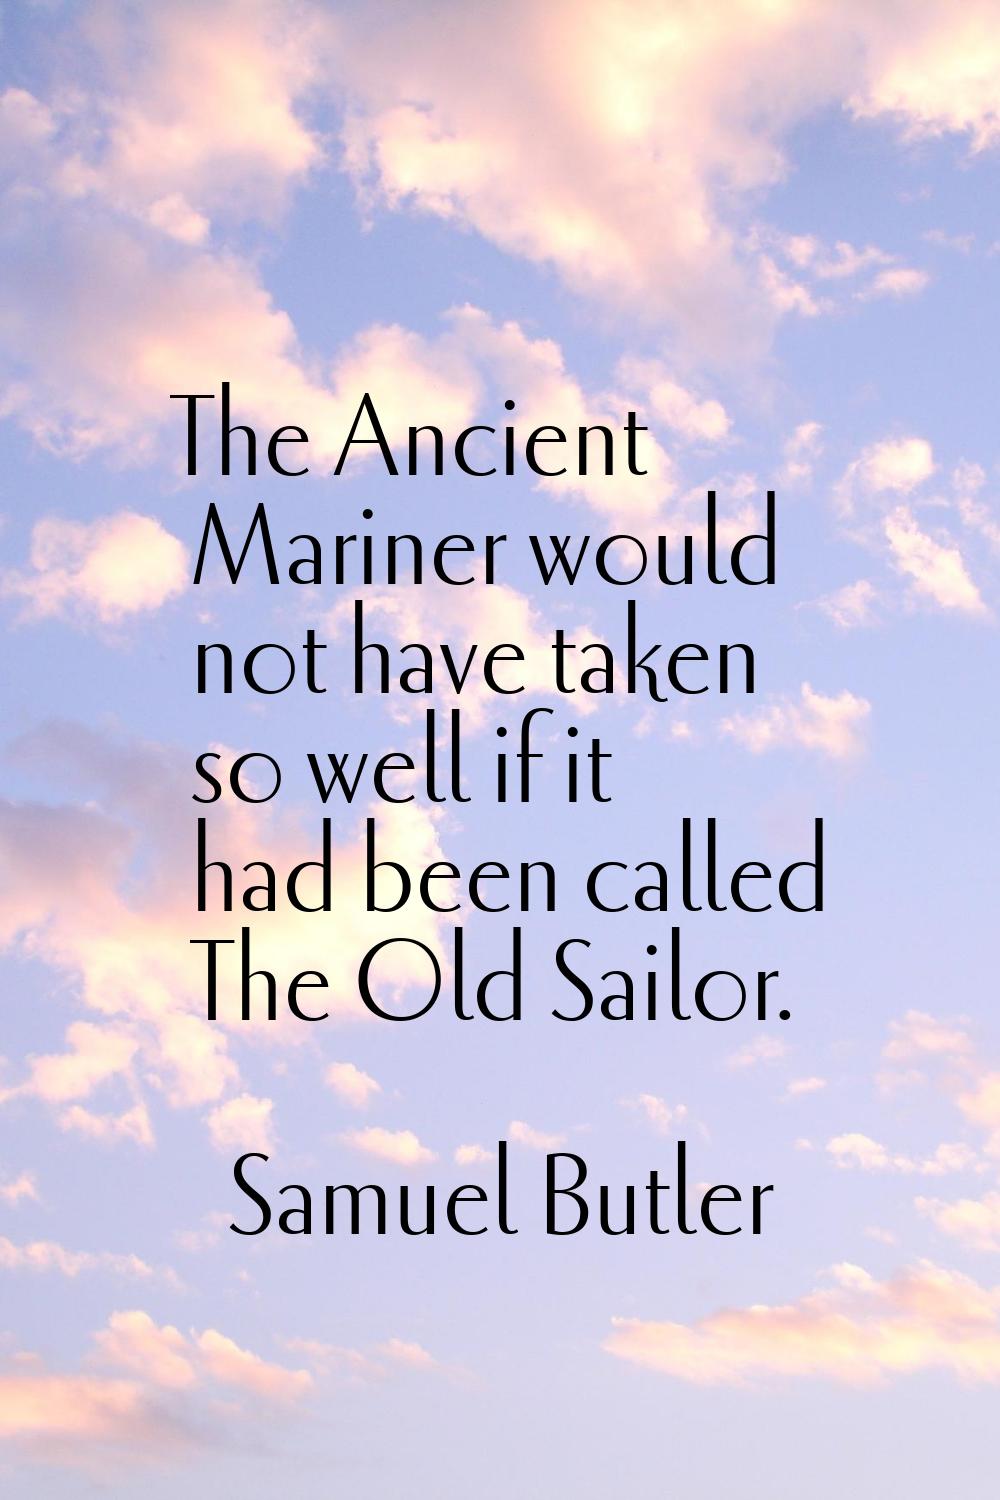 The Ancient Mariner would not have taken so well if it had been called The Old Sailor.